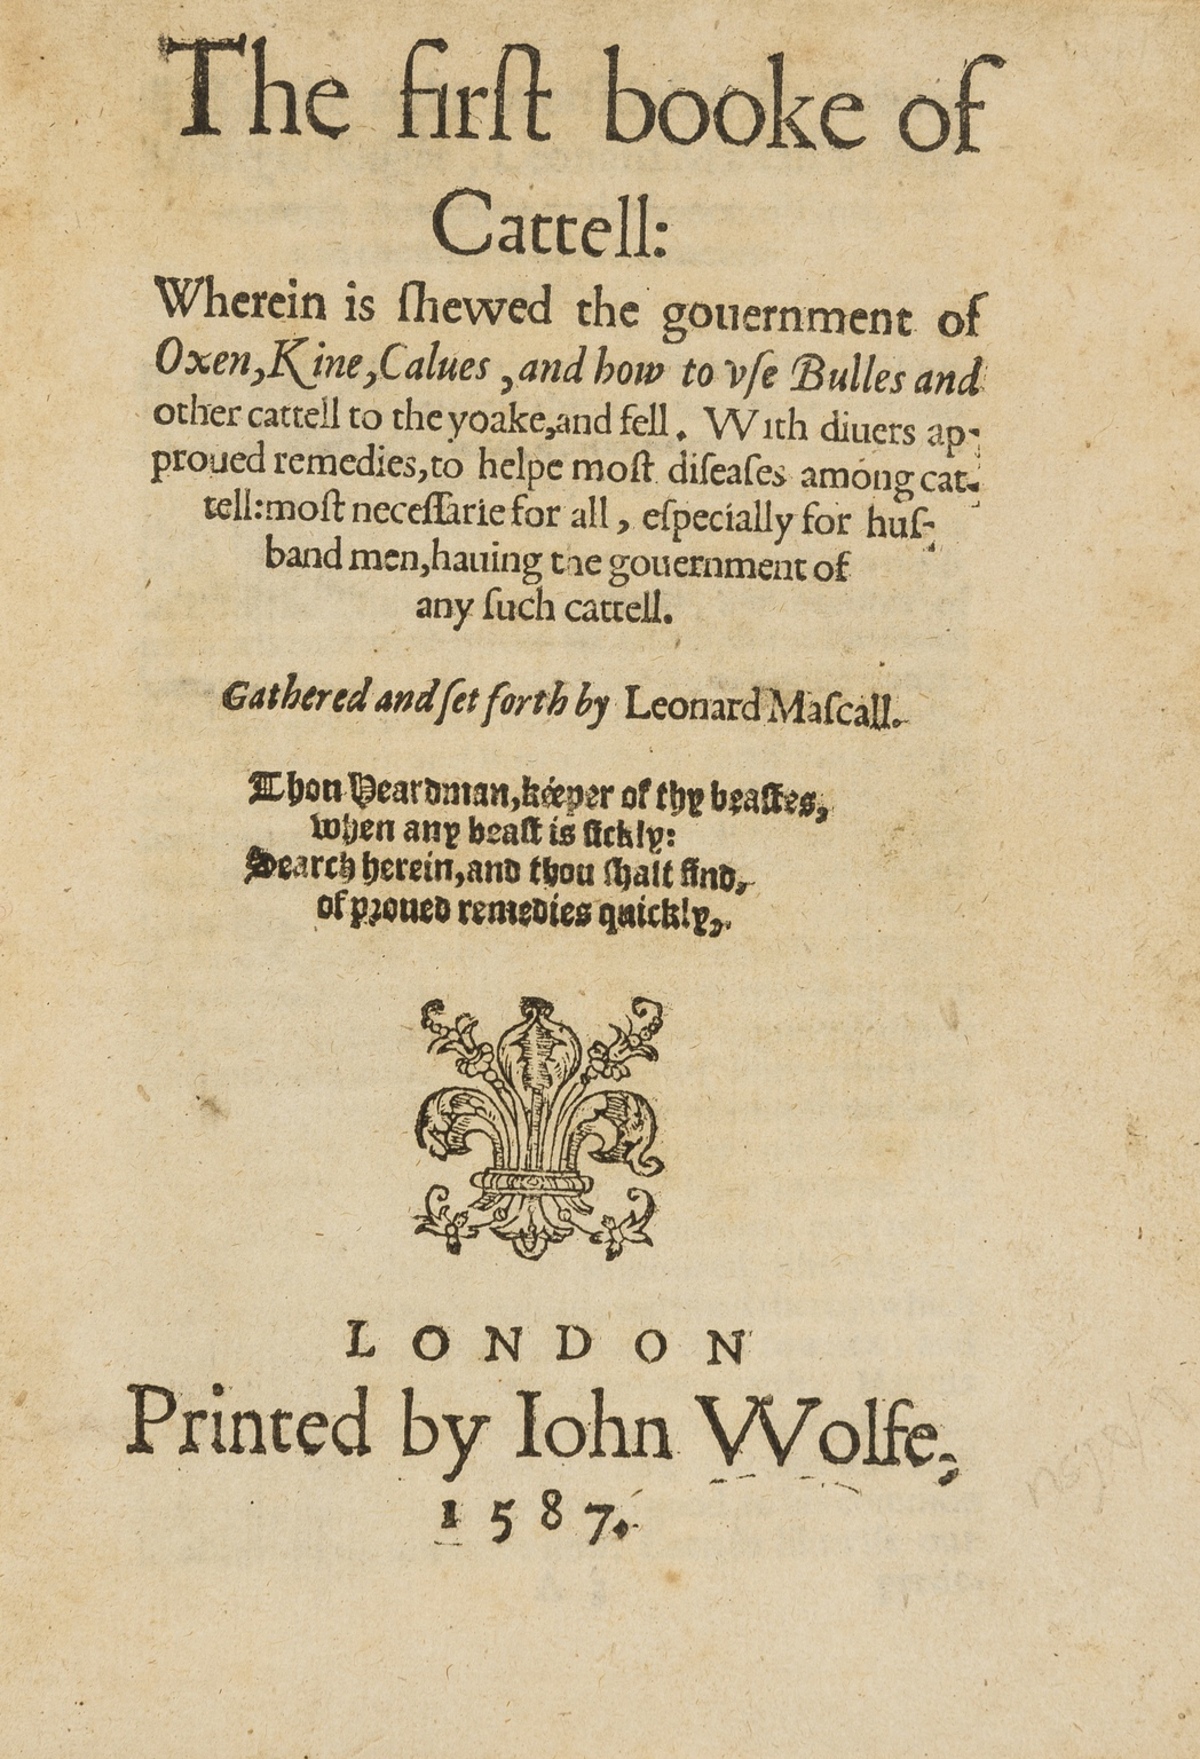 Agriculture.- Mascall (Leonard) The First Booke of Cattell, 3 parts in 1, first edition, by John …